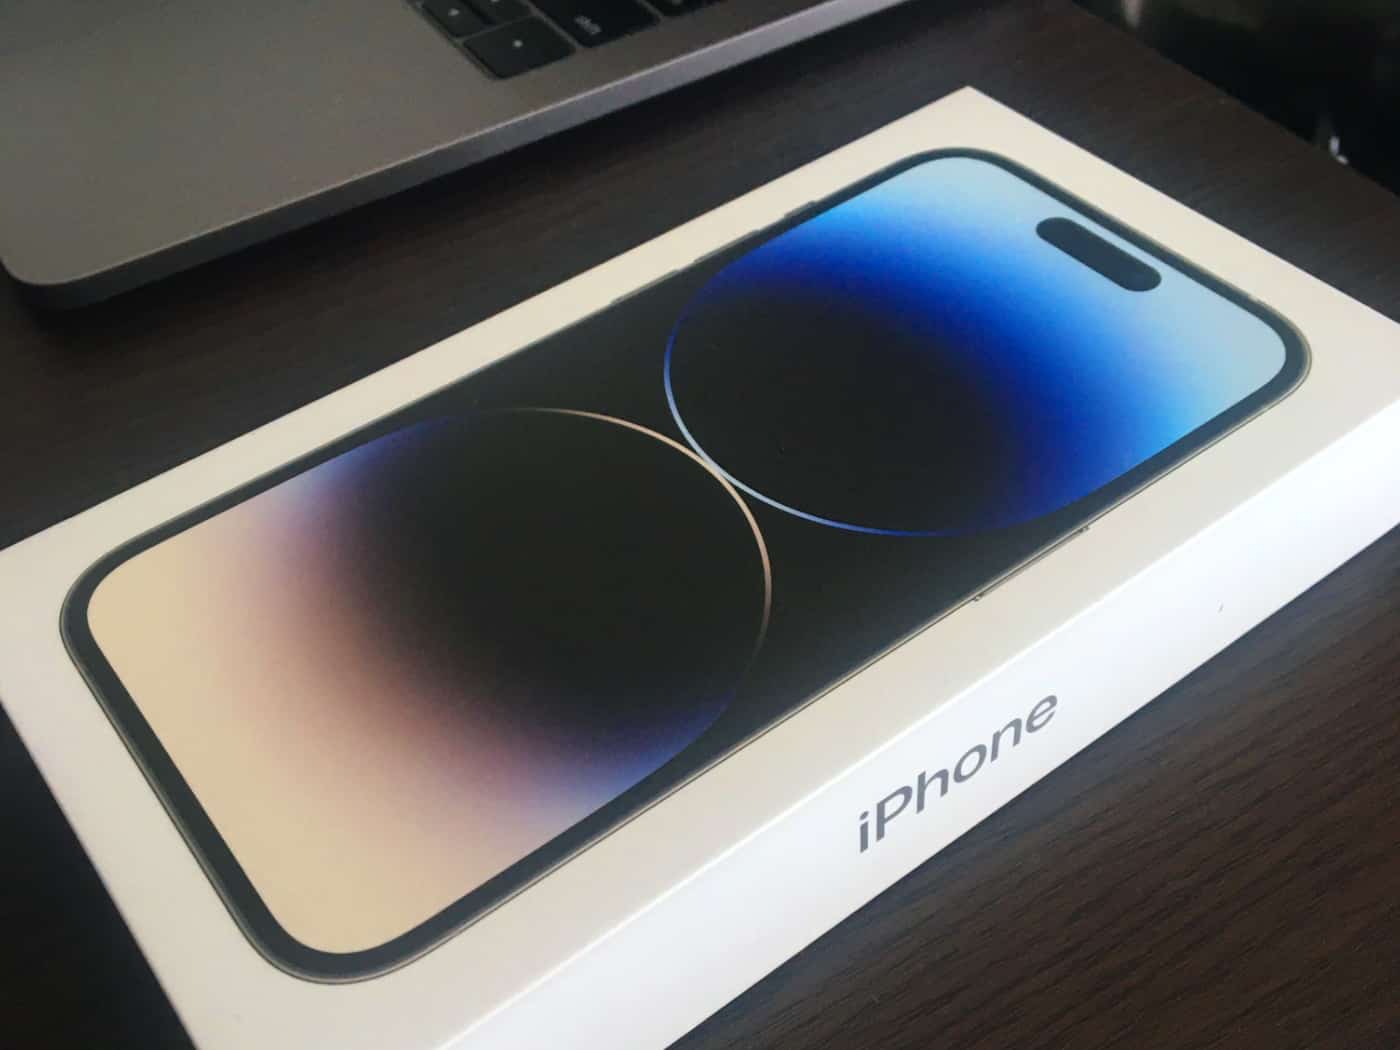 iPhone 14 Pro box with an image of the phone displayed on the front, placed on a wooden desk surface next to a laptop